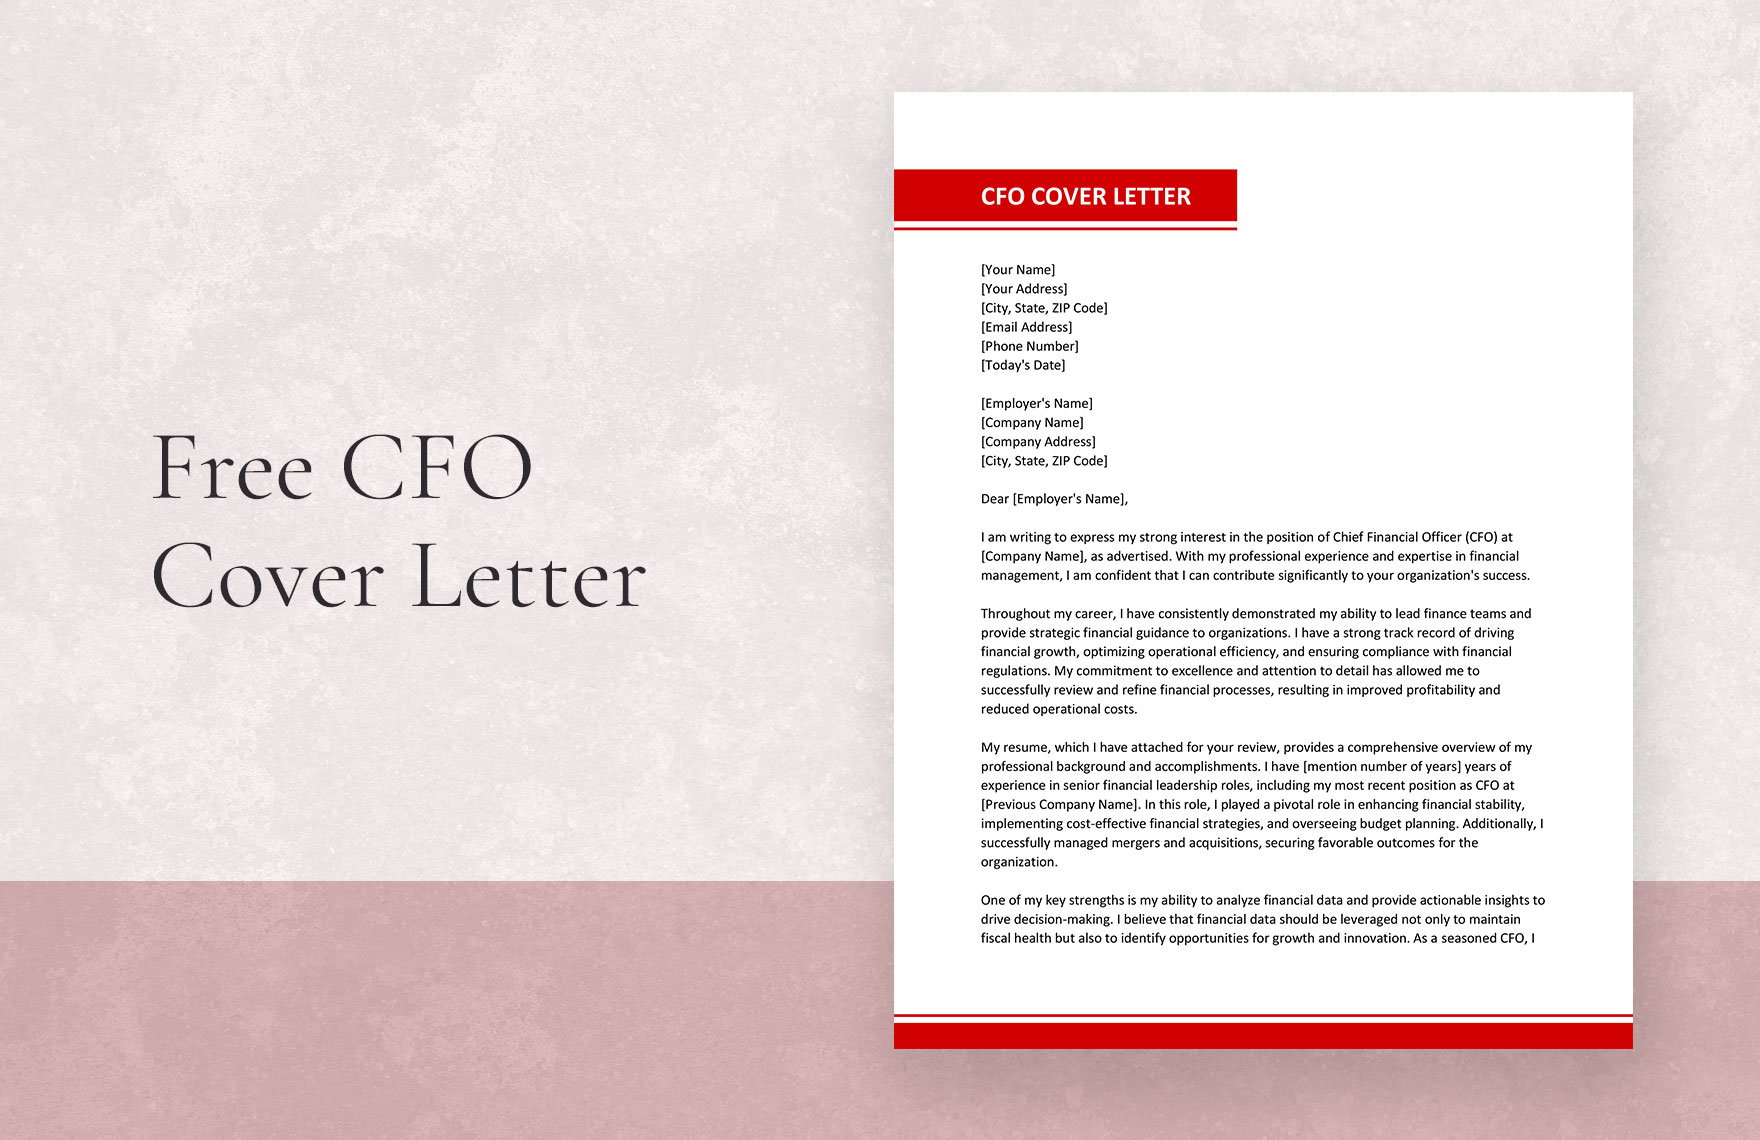 CFO Cover Letter in Word, Google Docs, Apple Pages